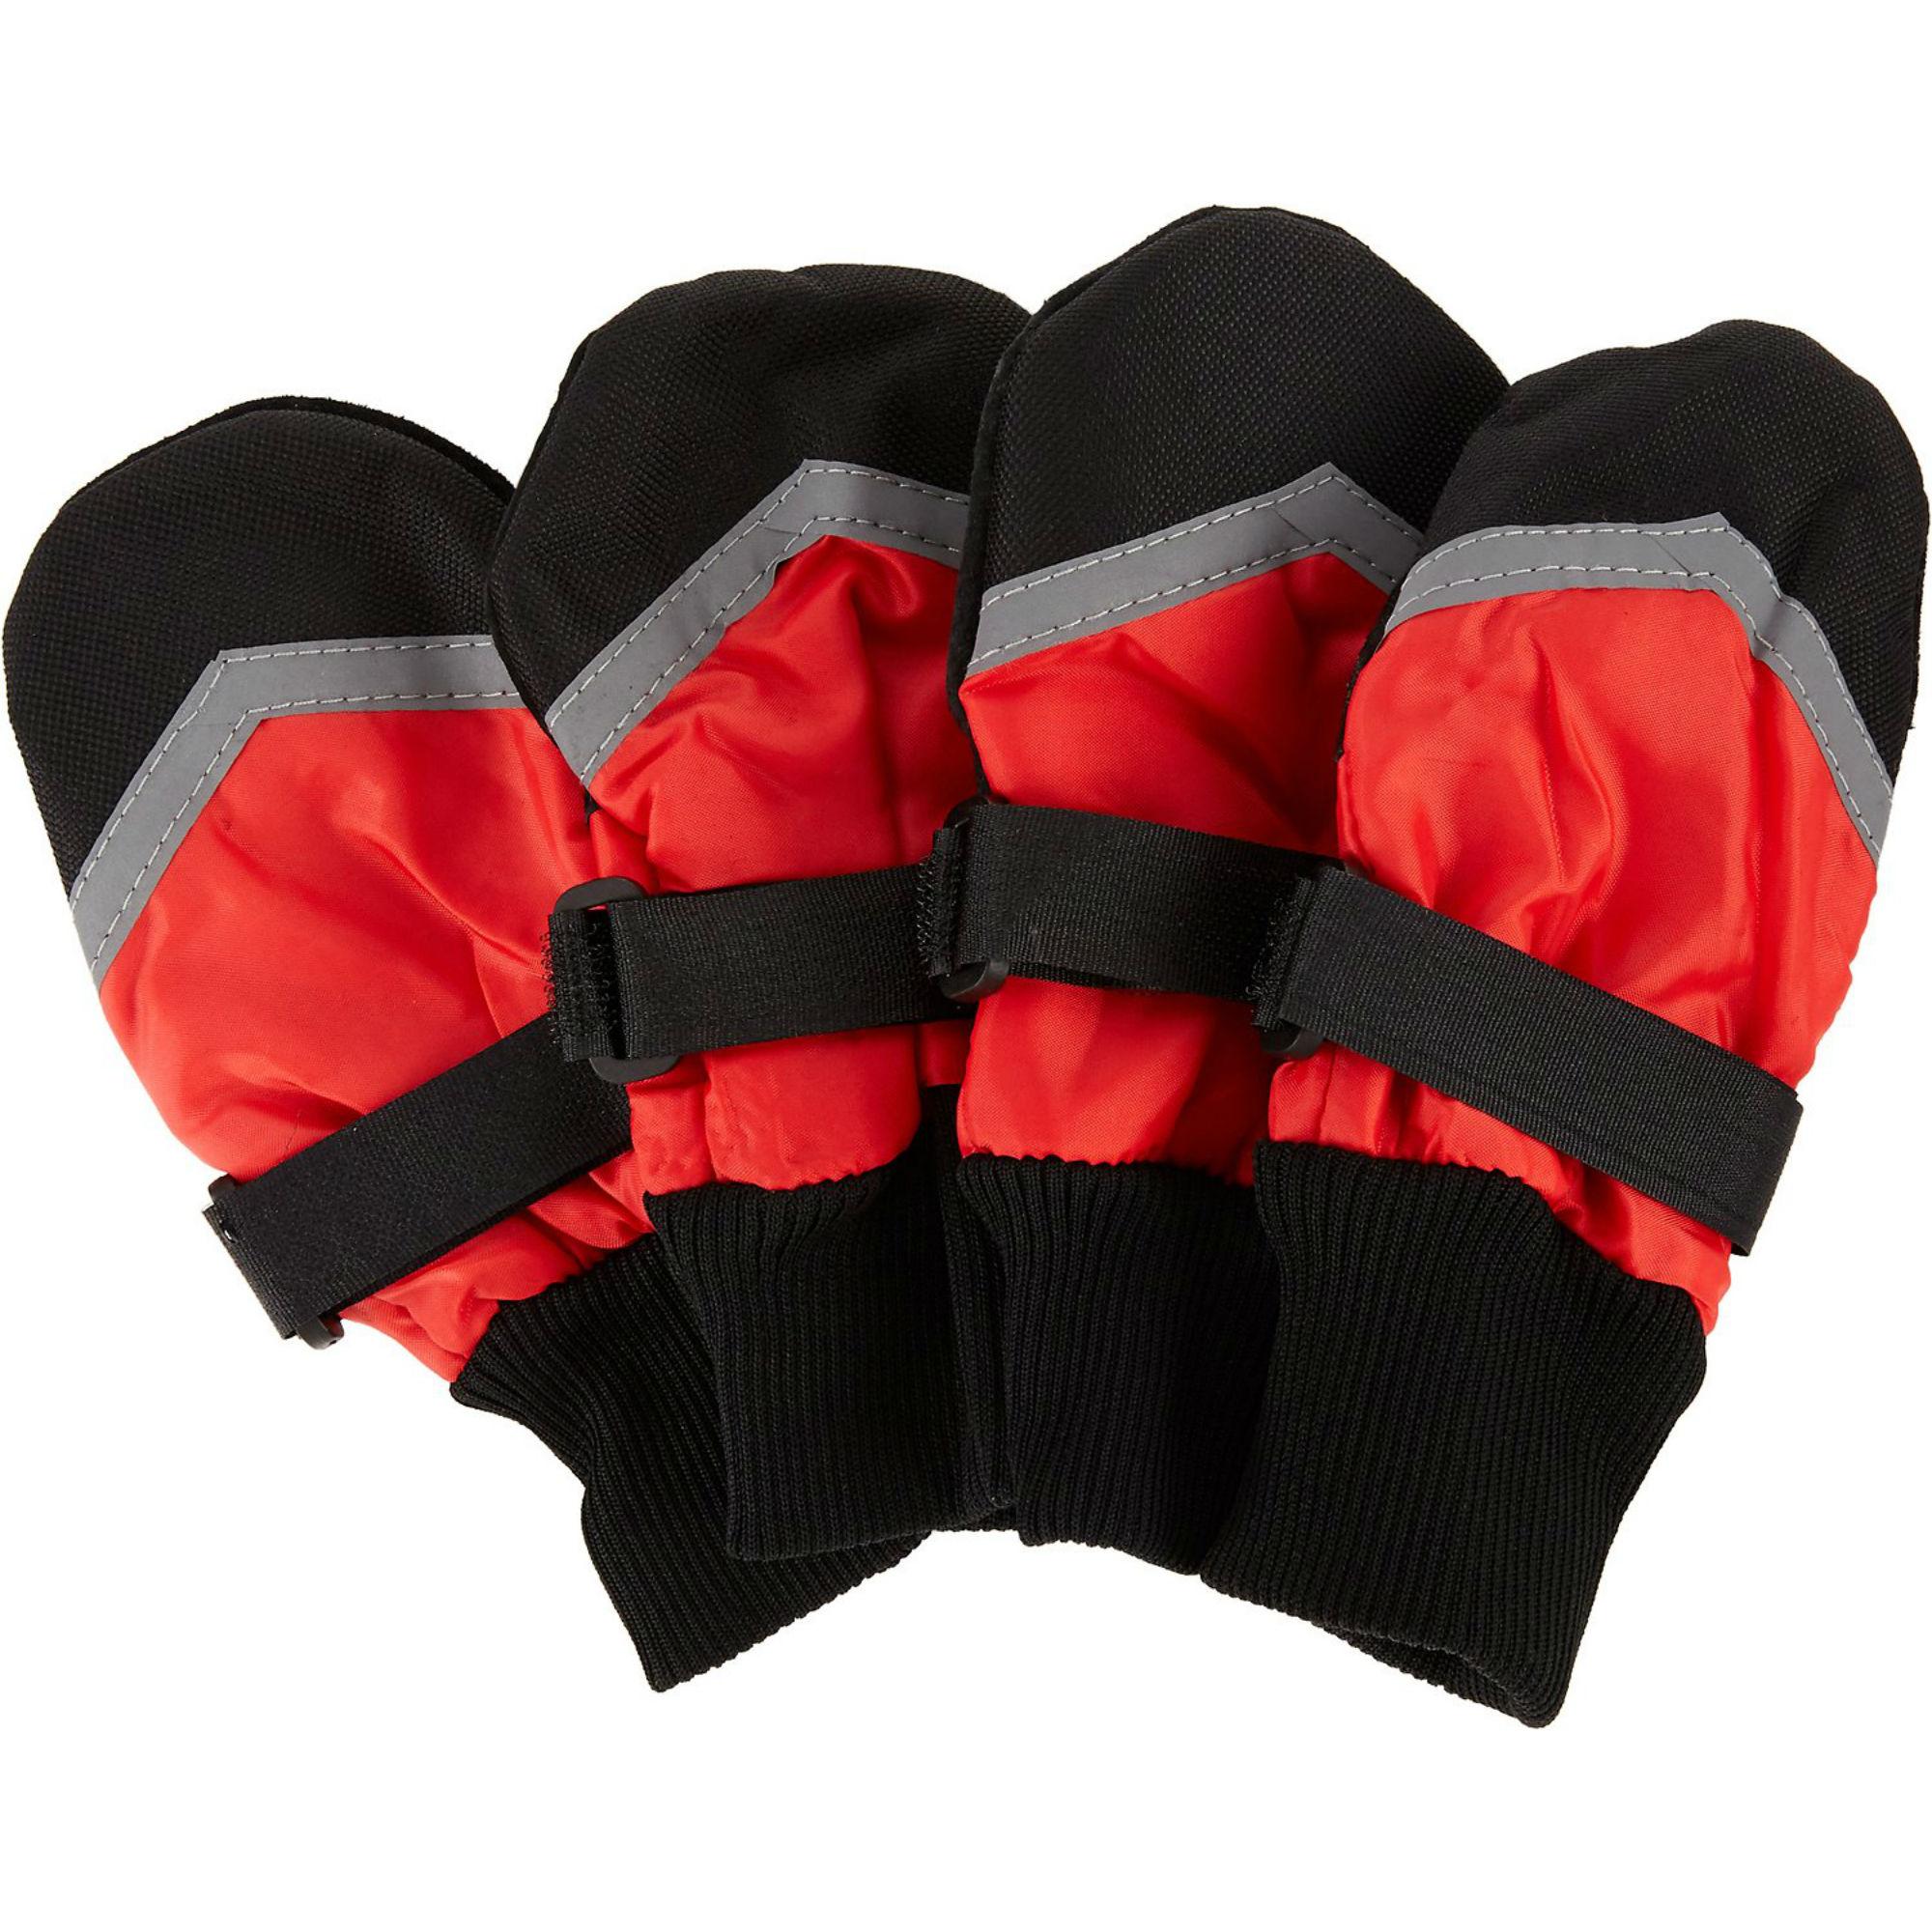 Fashion Pet Extreme All-Weather Dog Boots - Red